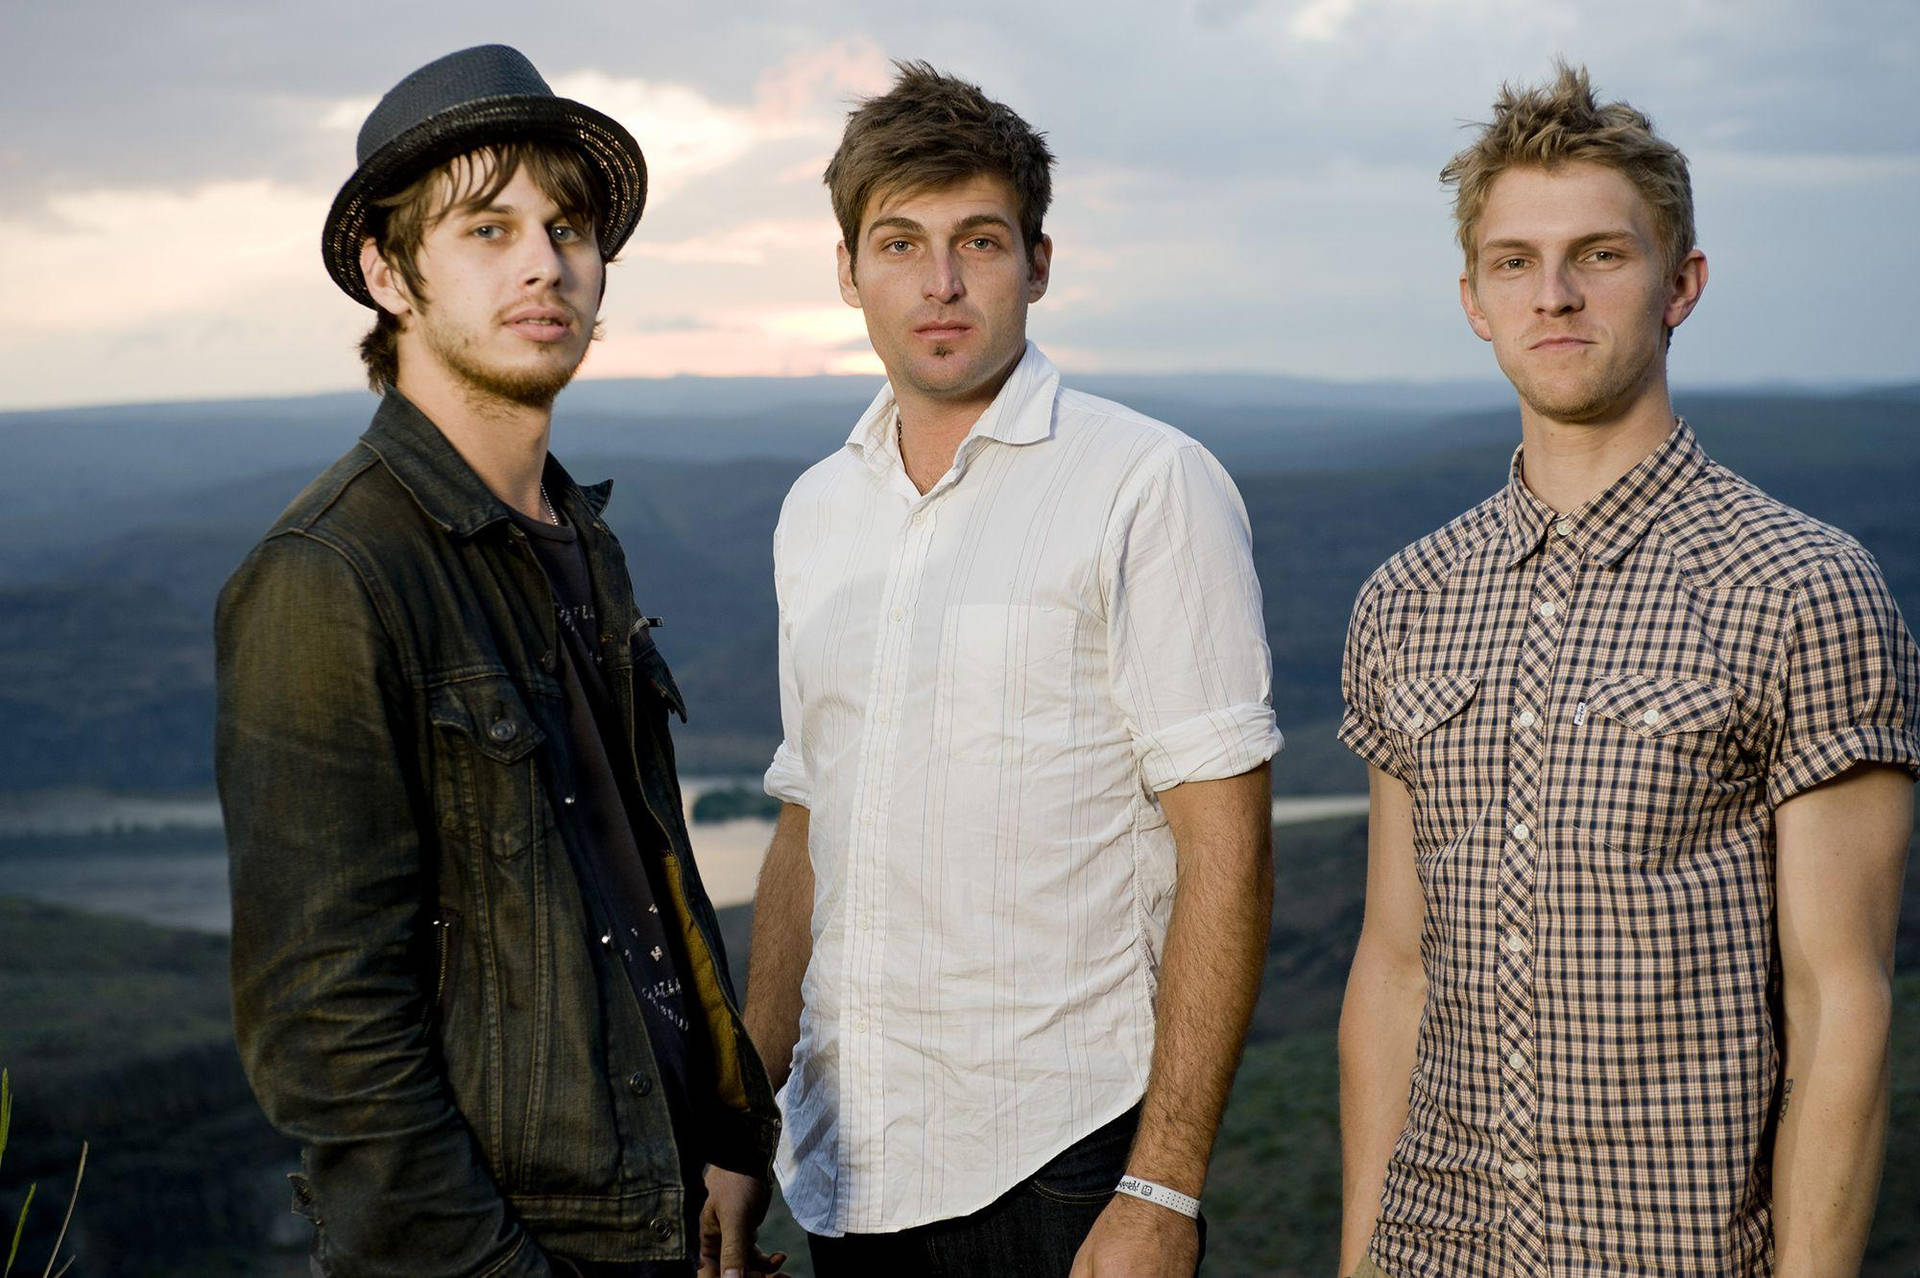 Pop Music Trio Foster The People Wallpaper